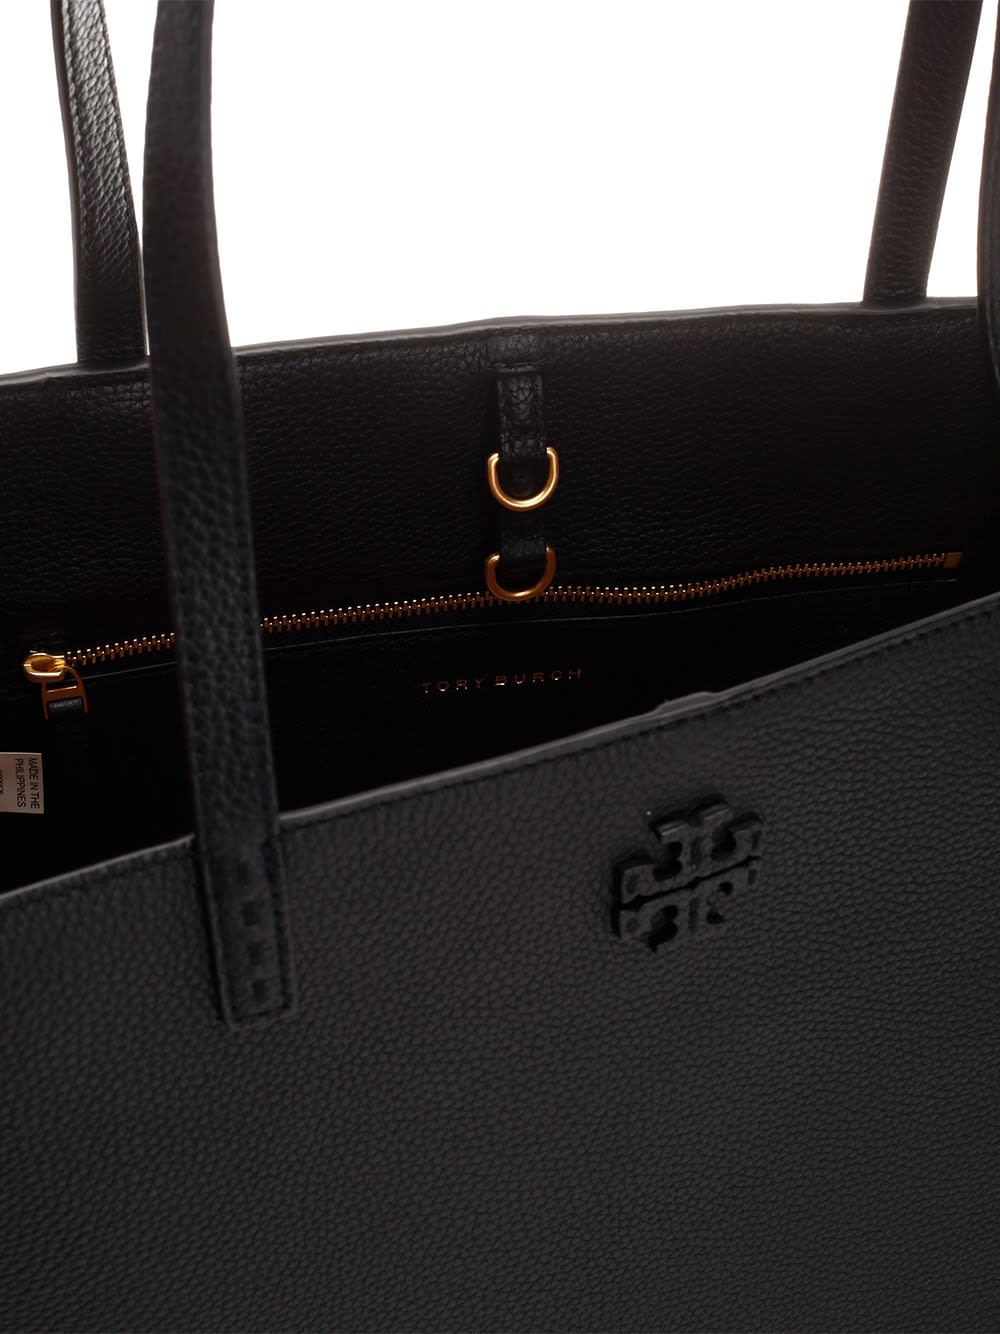 Shop Tory Burch Black Leather Tote Bag